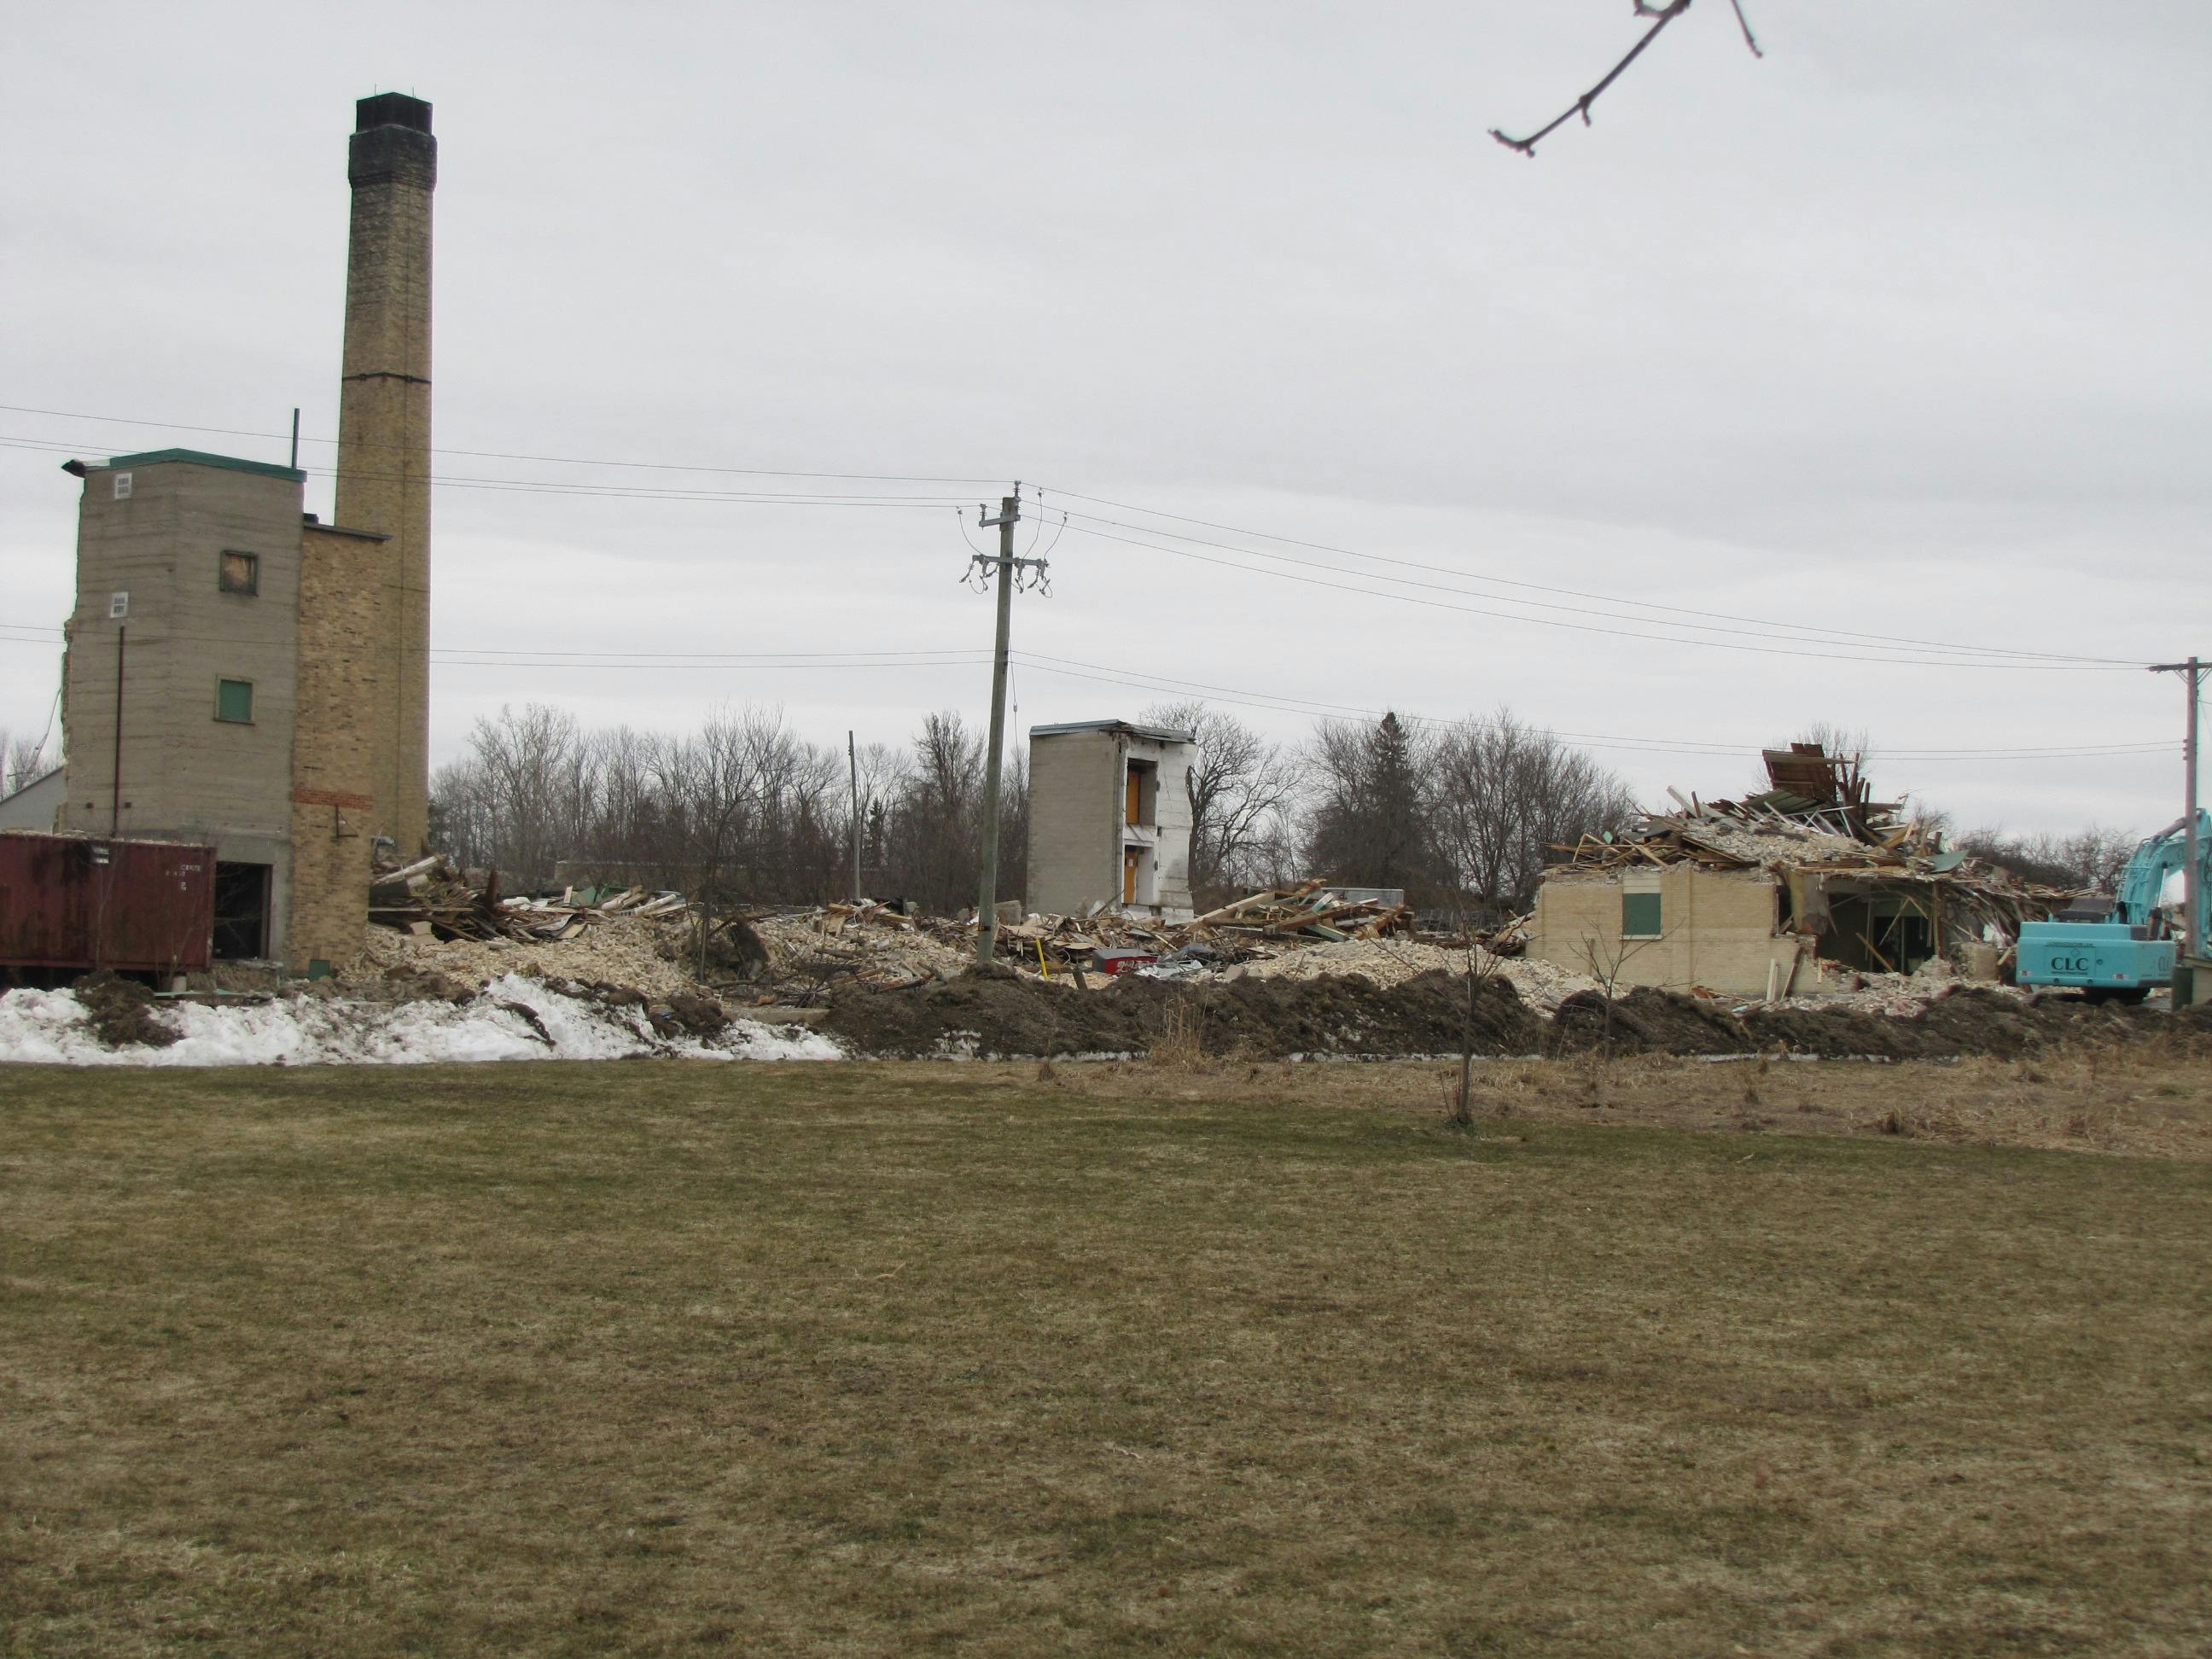 Demolition of Bogdon and Gross - March 16, 2021